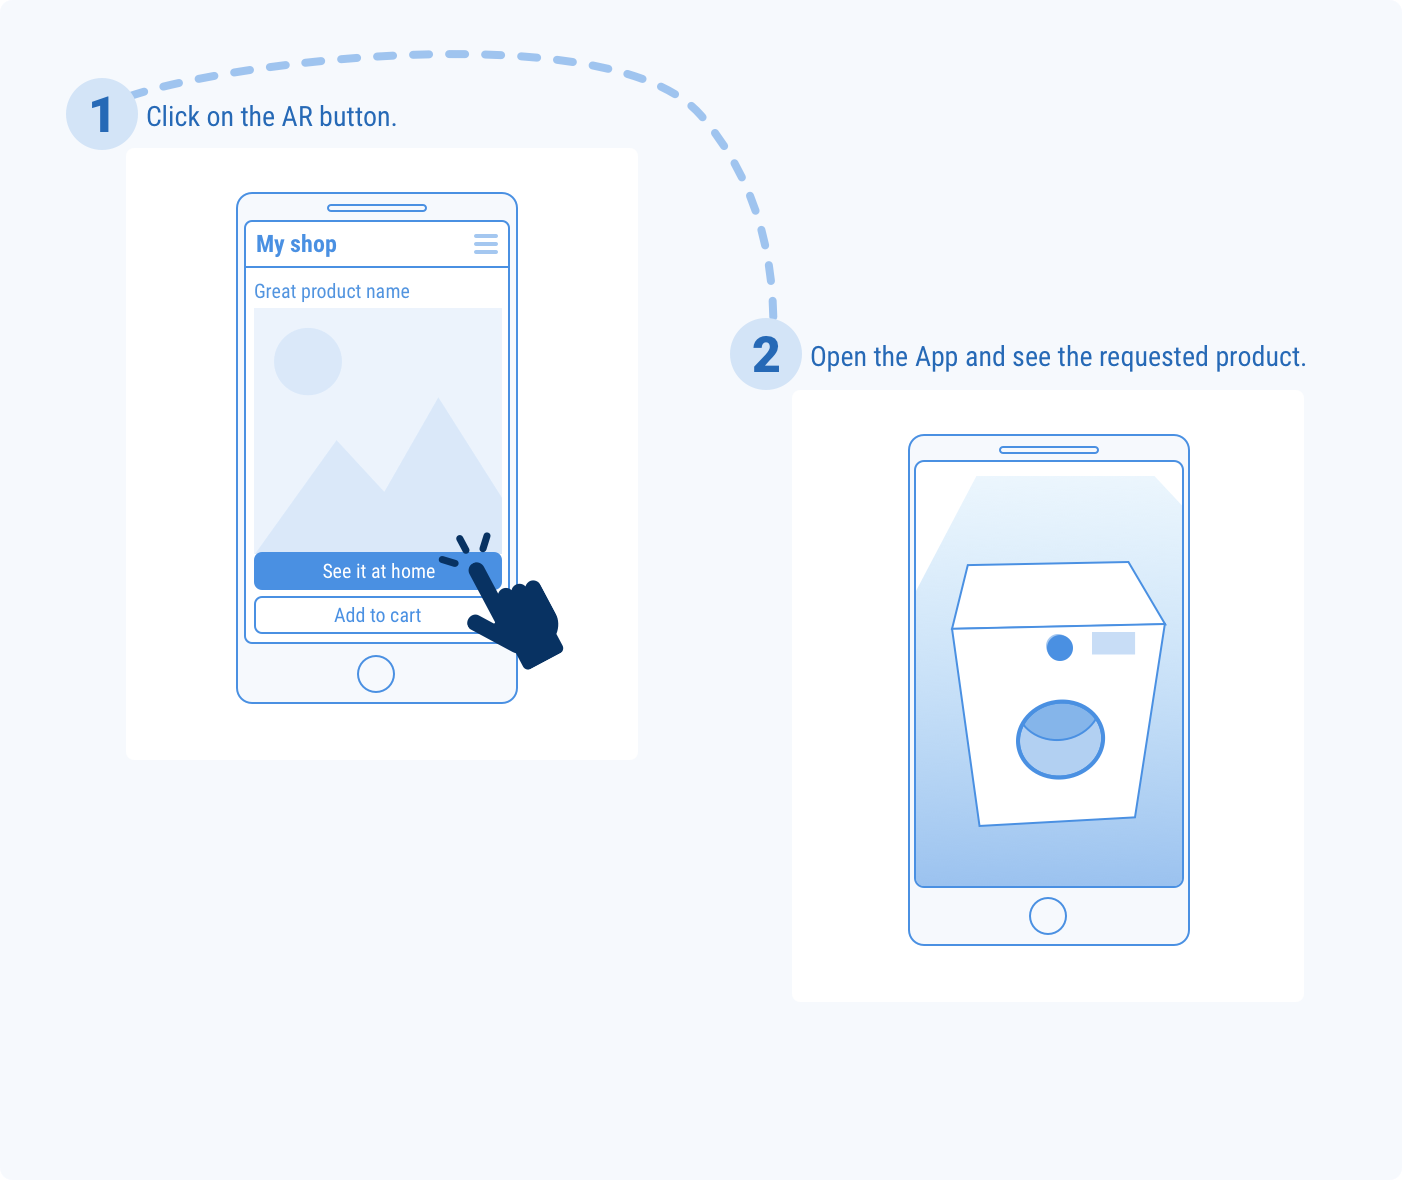 user flow directly from the website to the Augment App